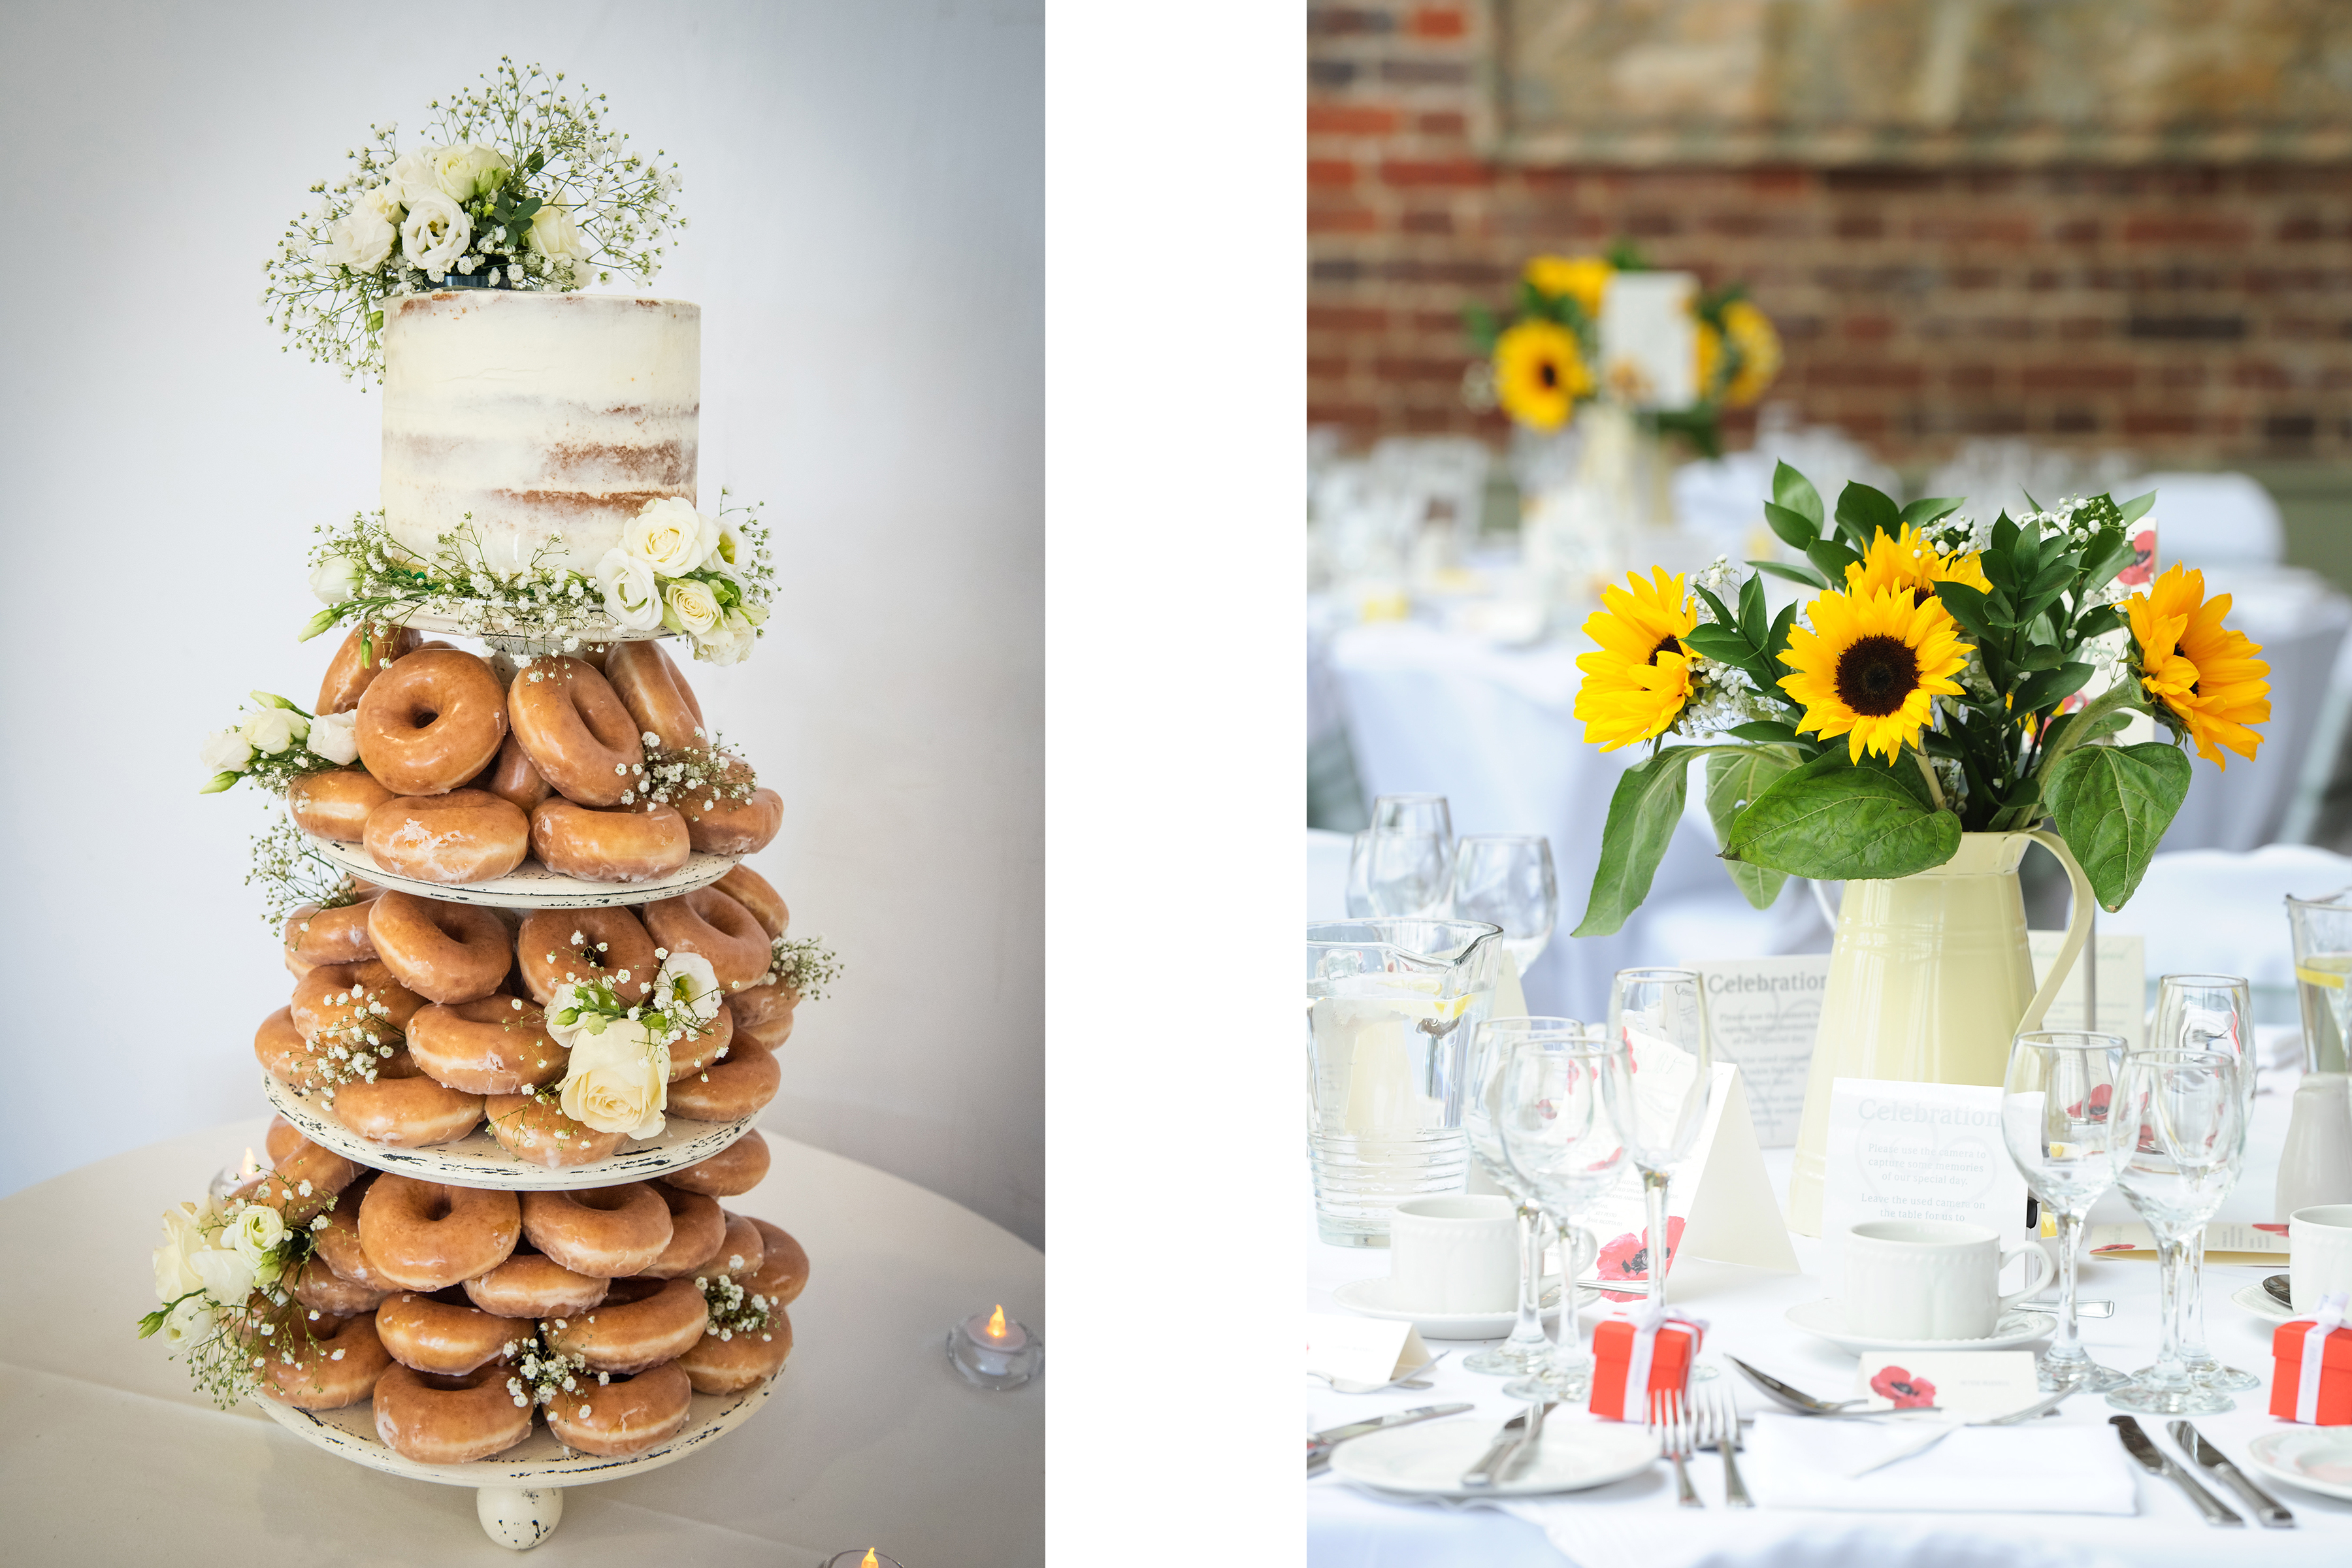 doughnut cake and table flowers